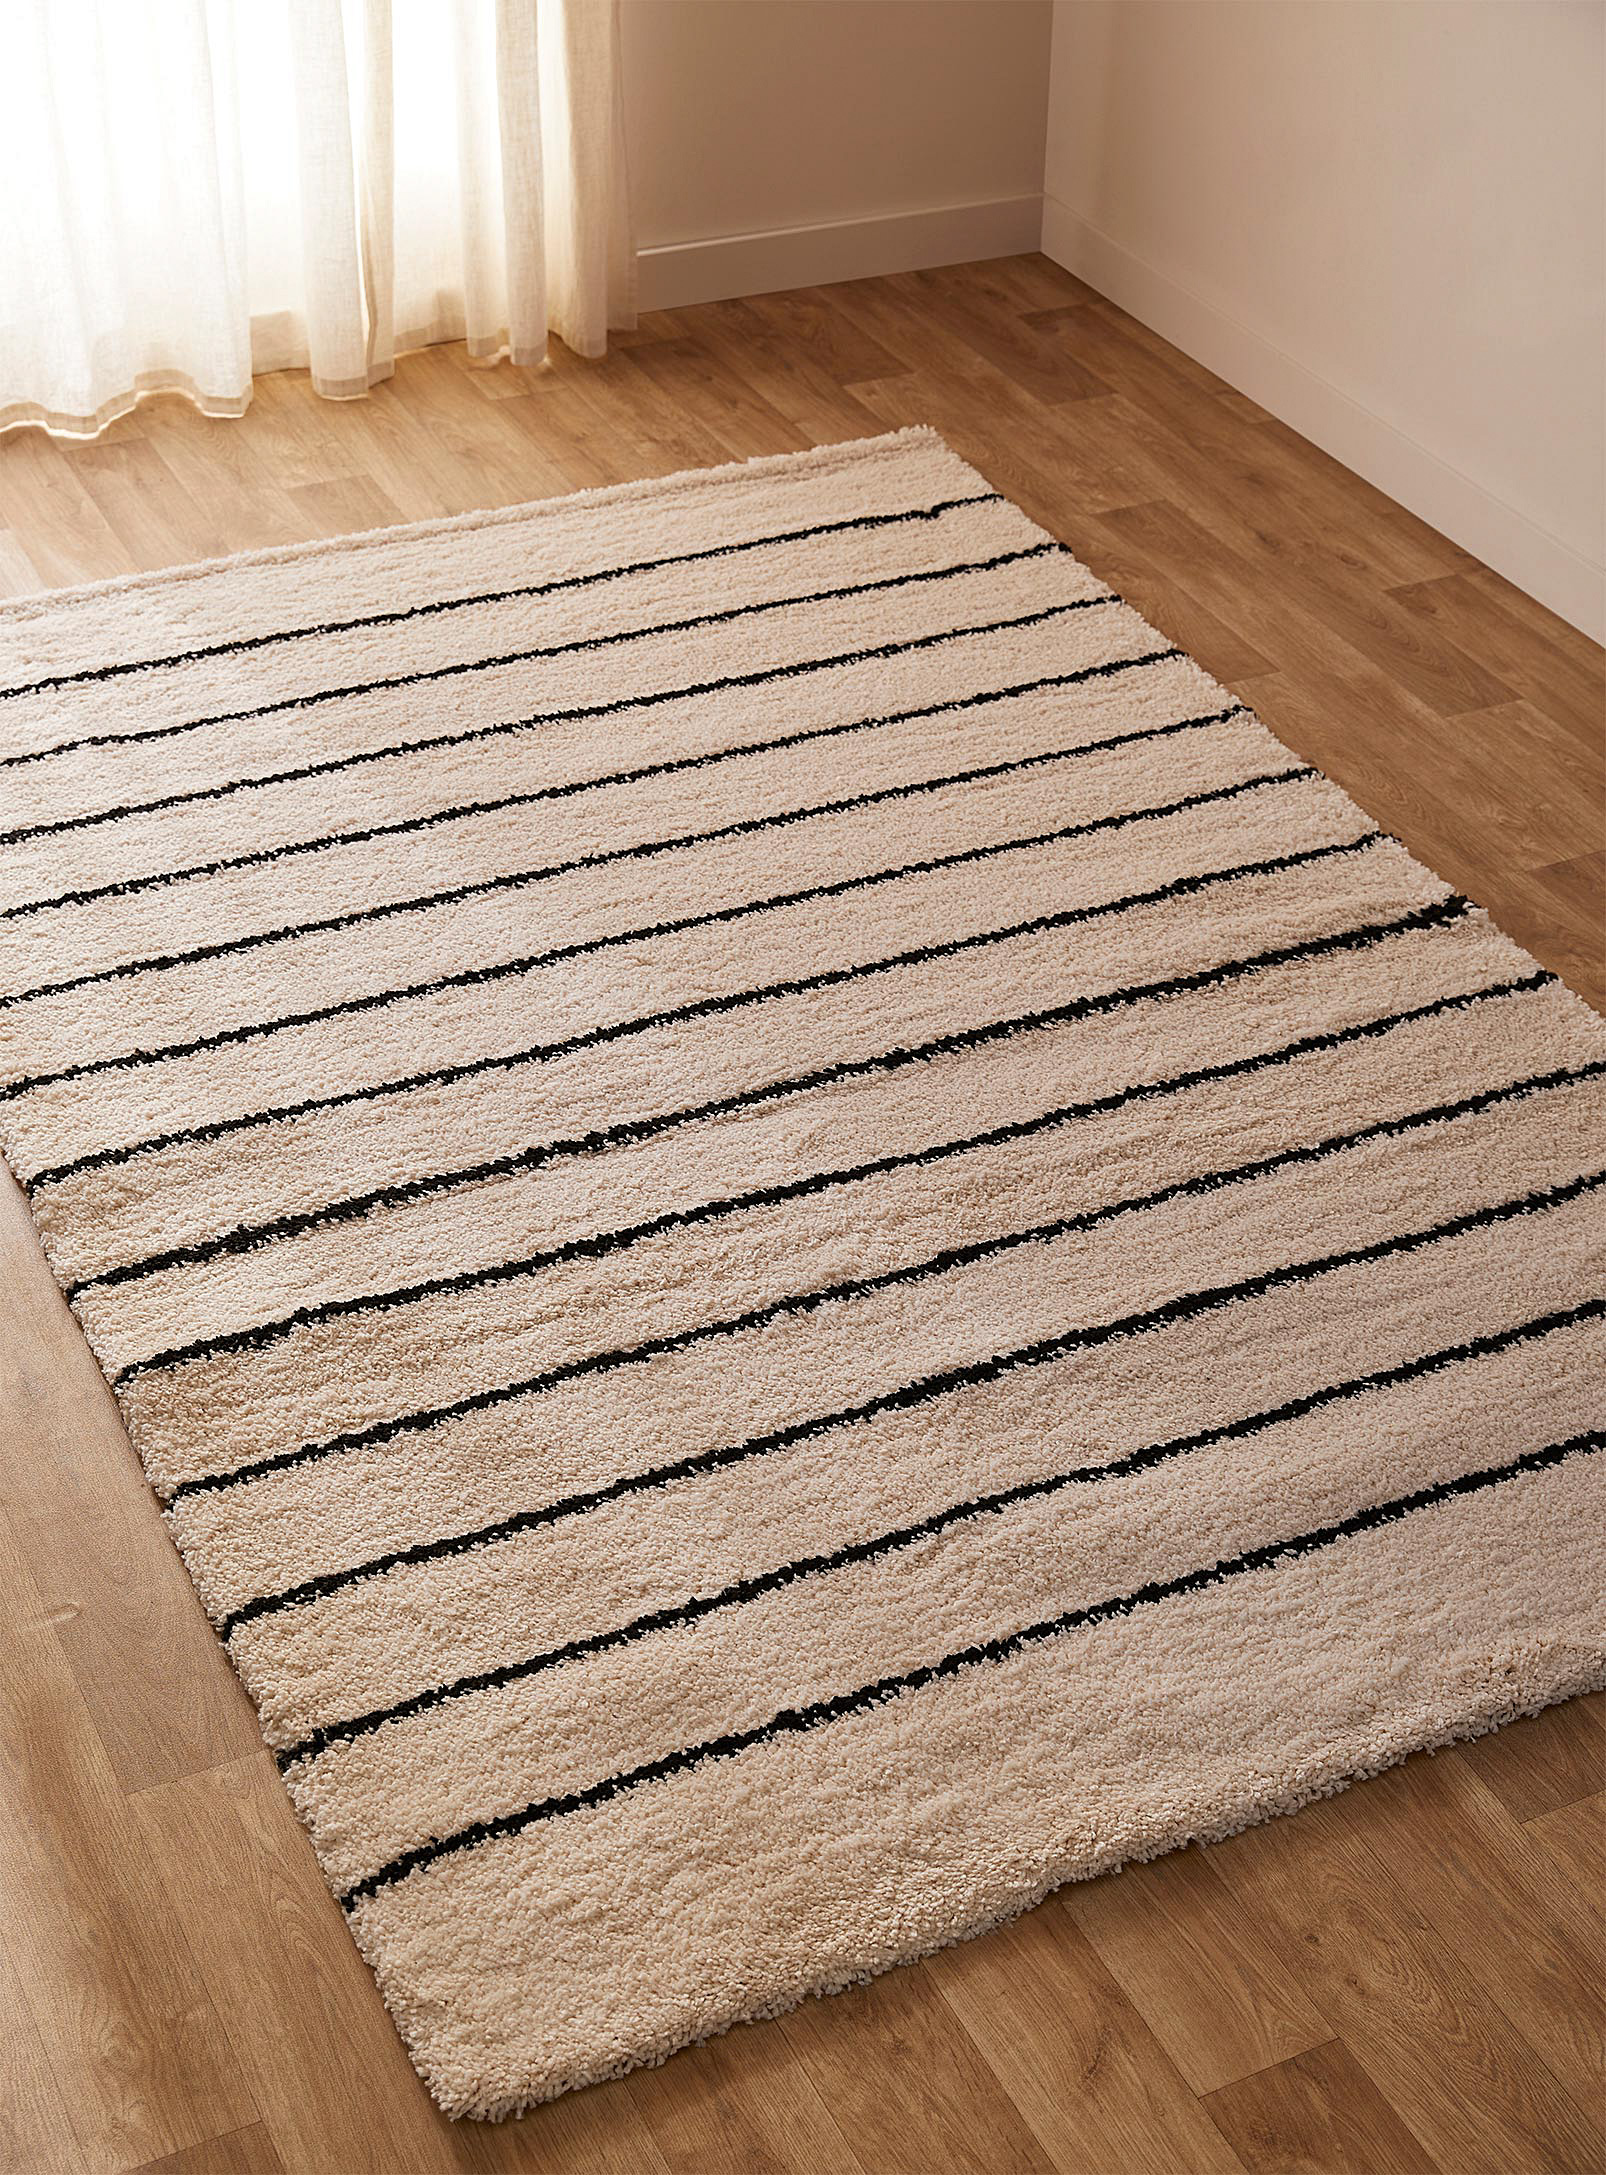 Simons Maison Thin Contrasting Shag Rug See Available Sizes In Black And White